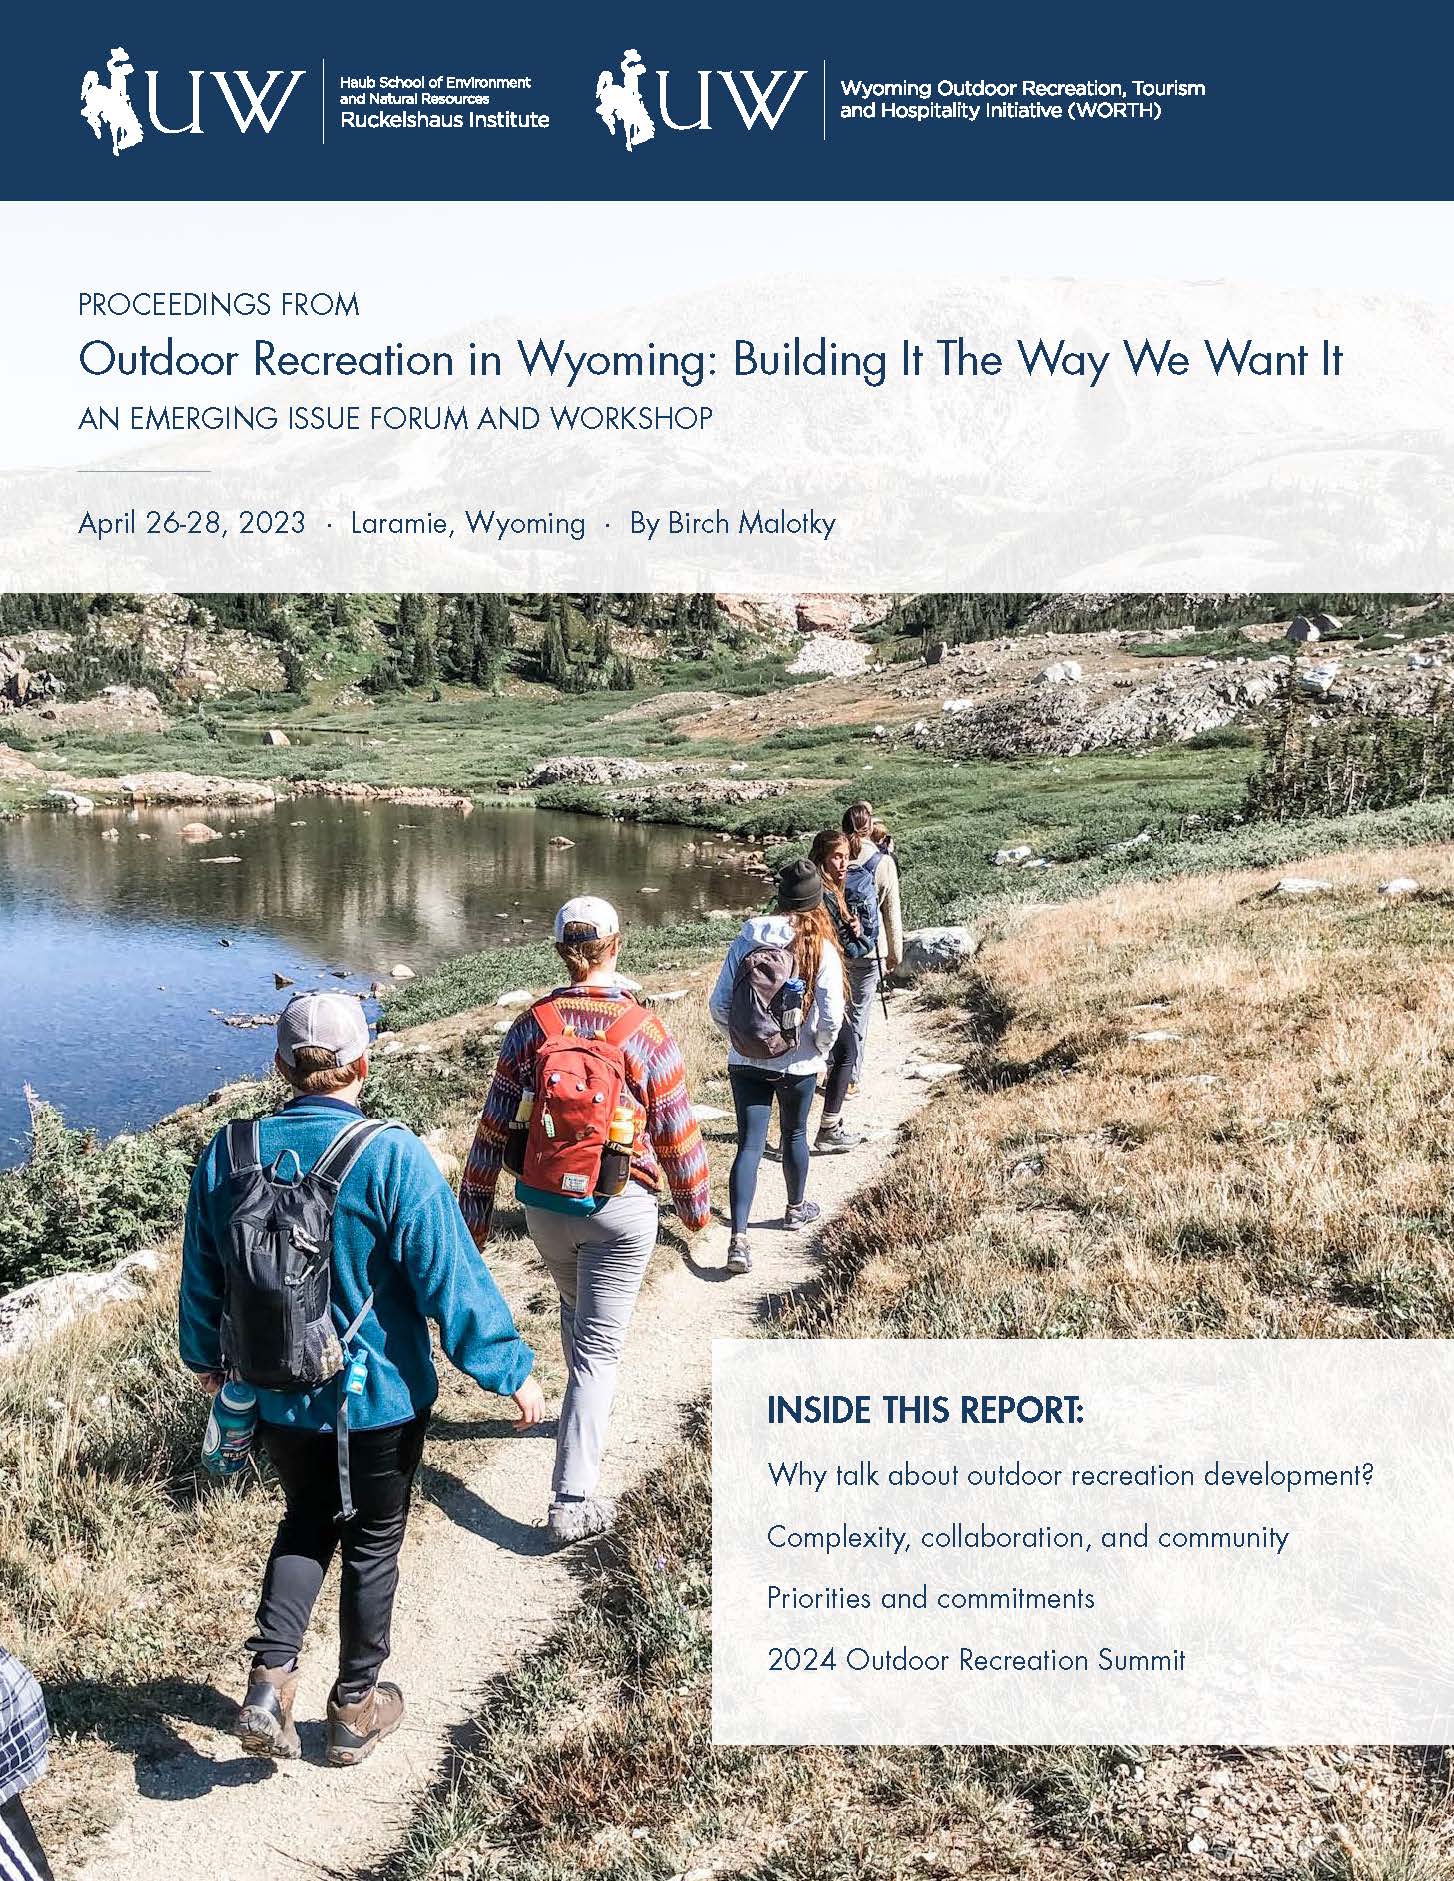 The cover of the outdoor recreation forum proceedings showing a group of people hiking in the snowy mountains